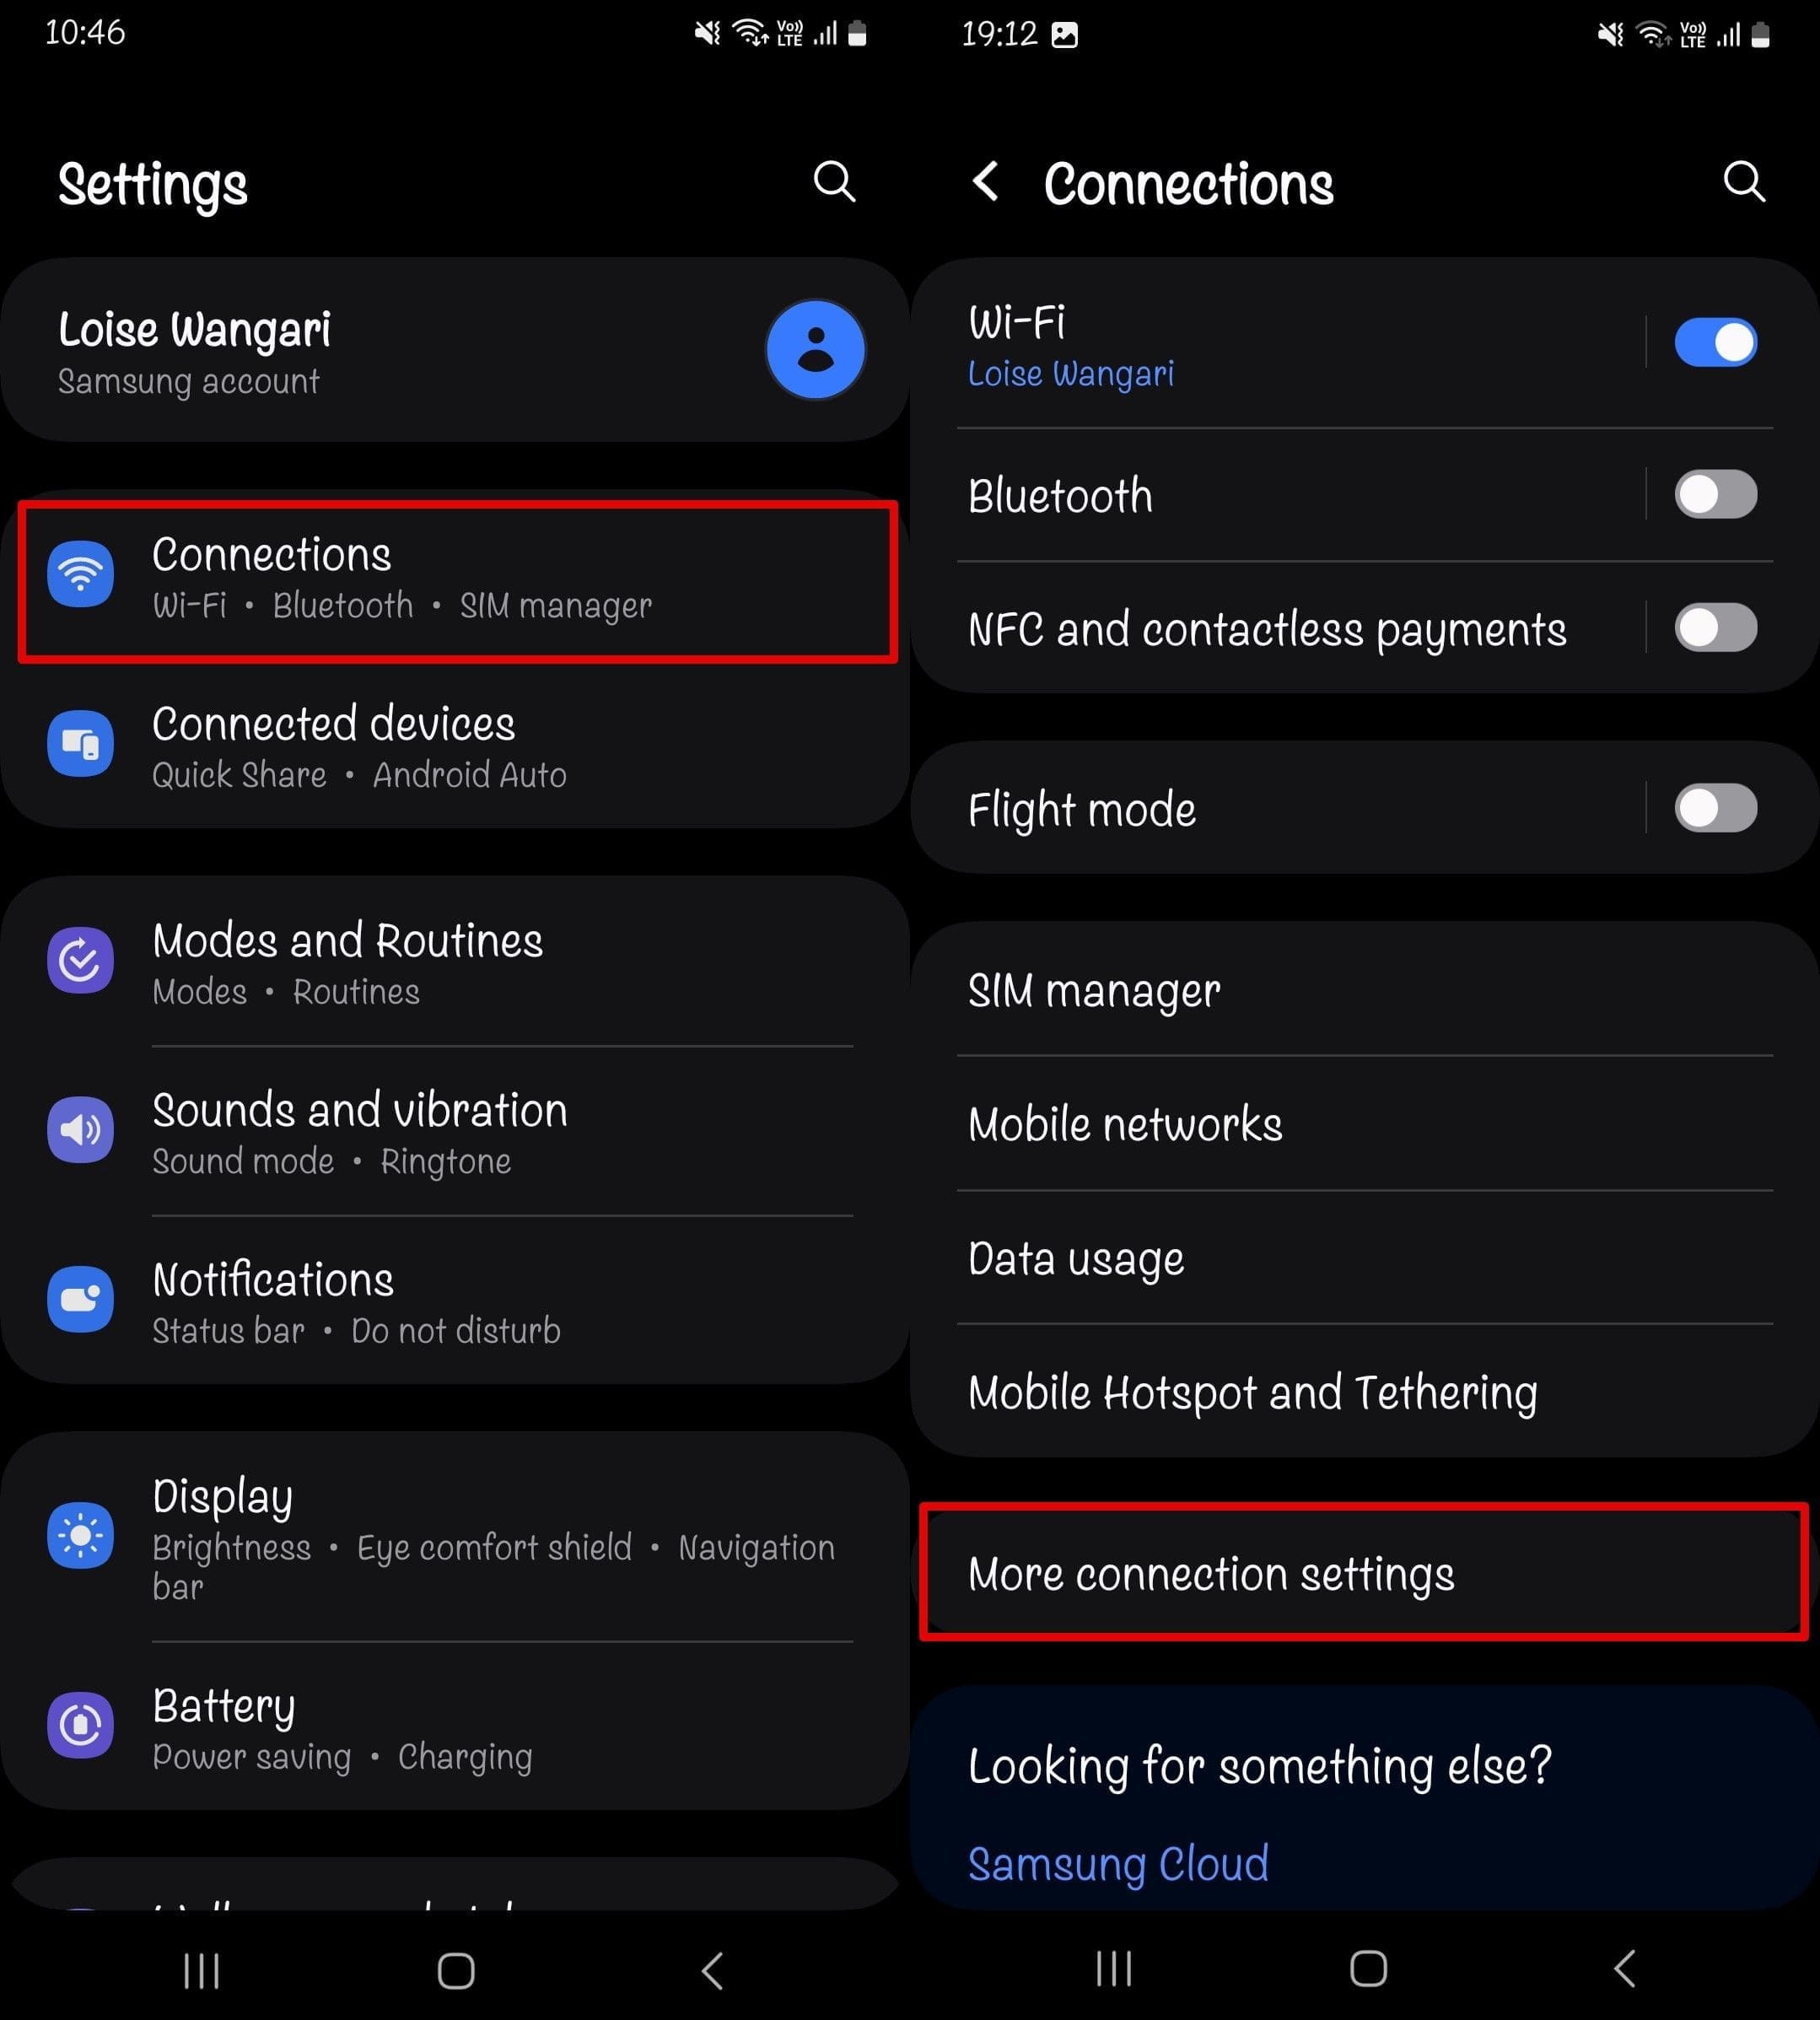 An image of how to access the Connections menu on Android